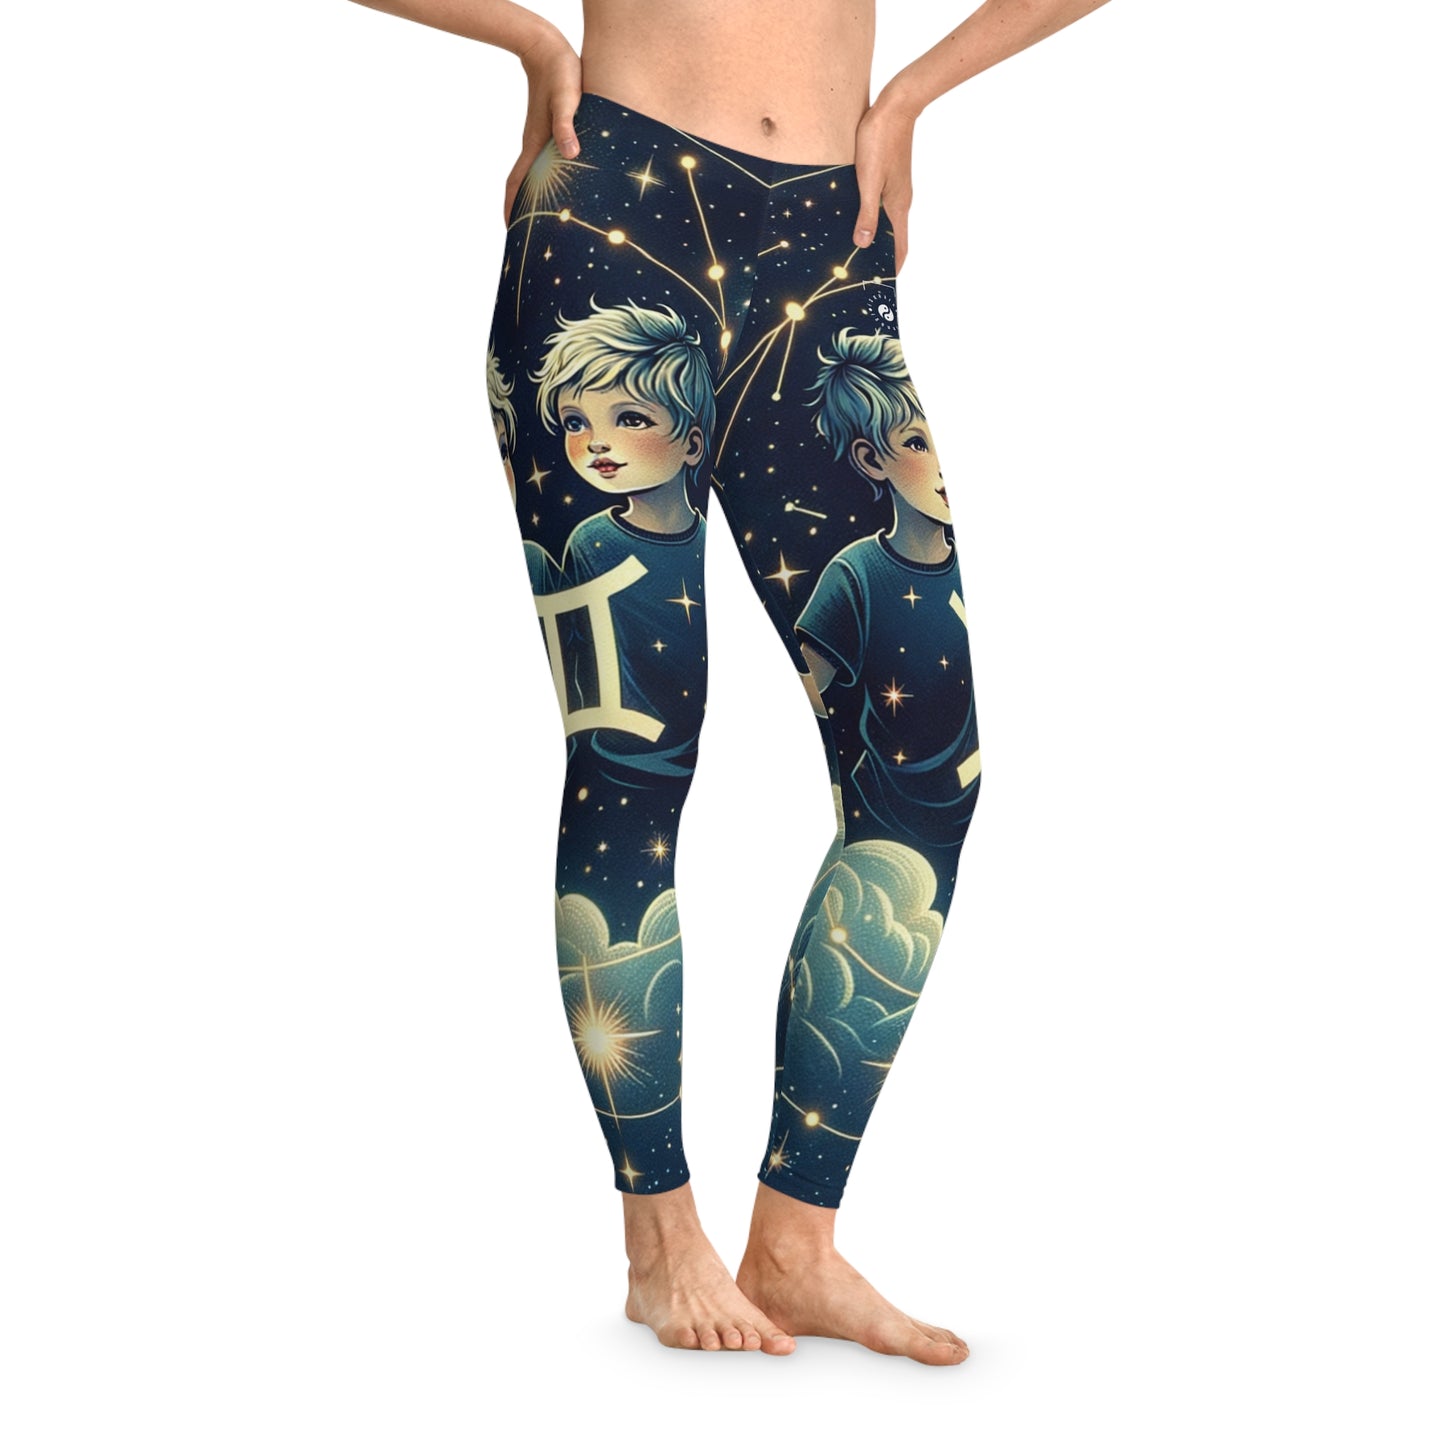 "Celestial Twinfinity" - Unisex Tights